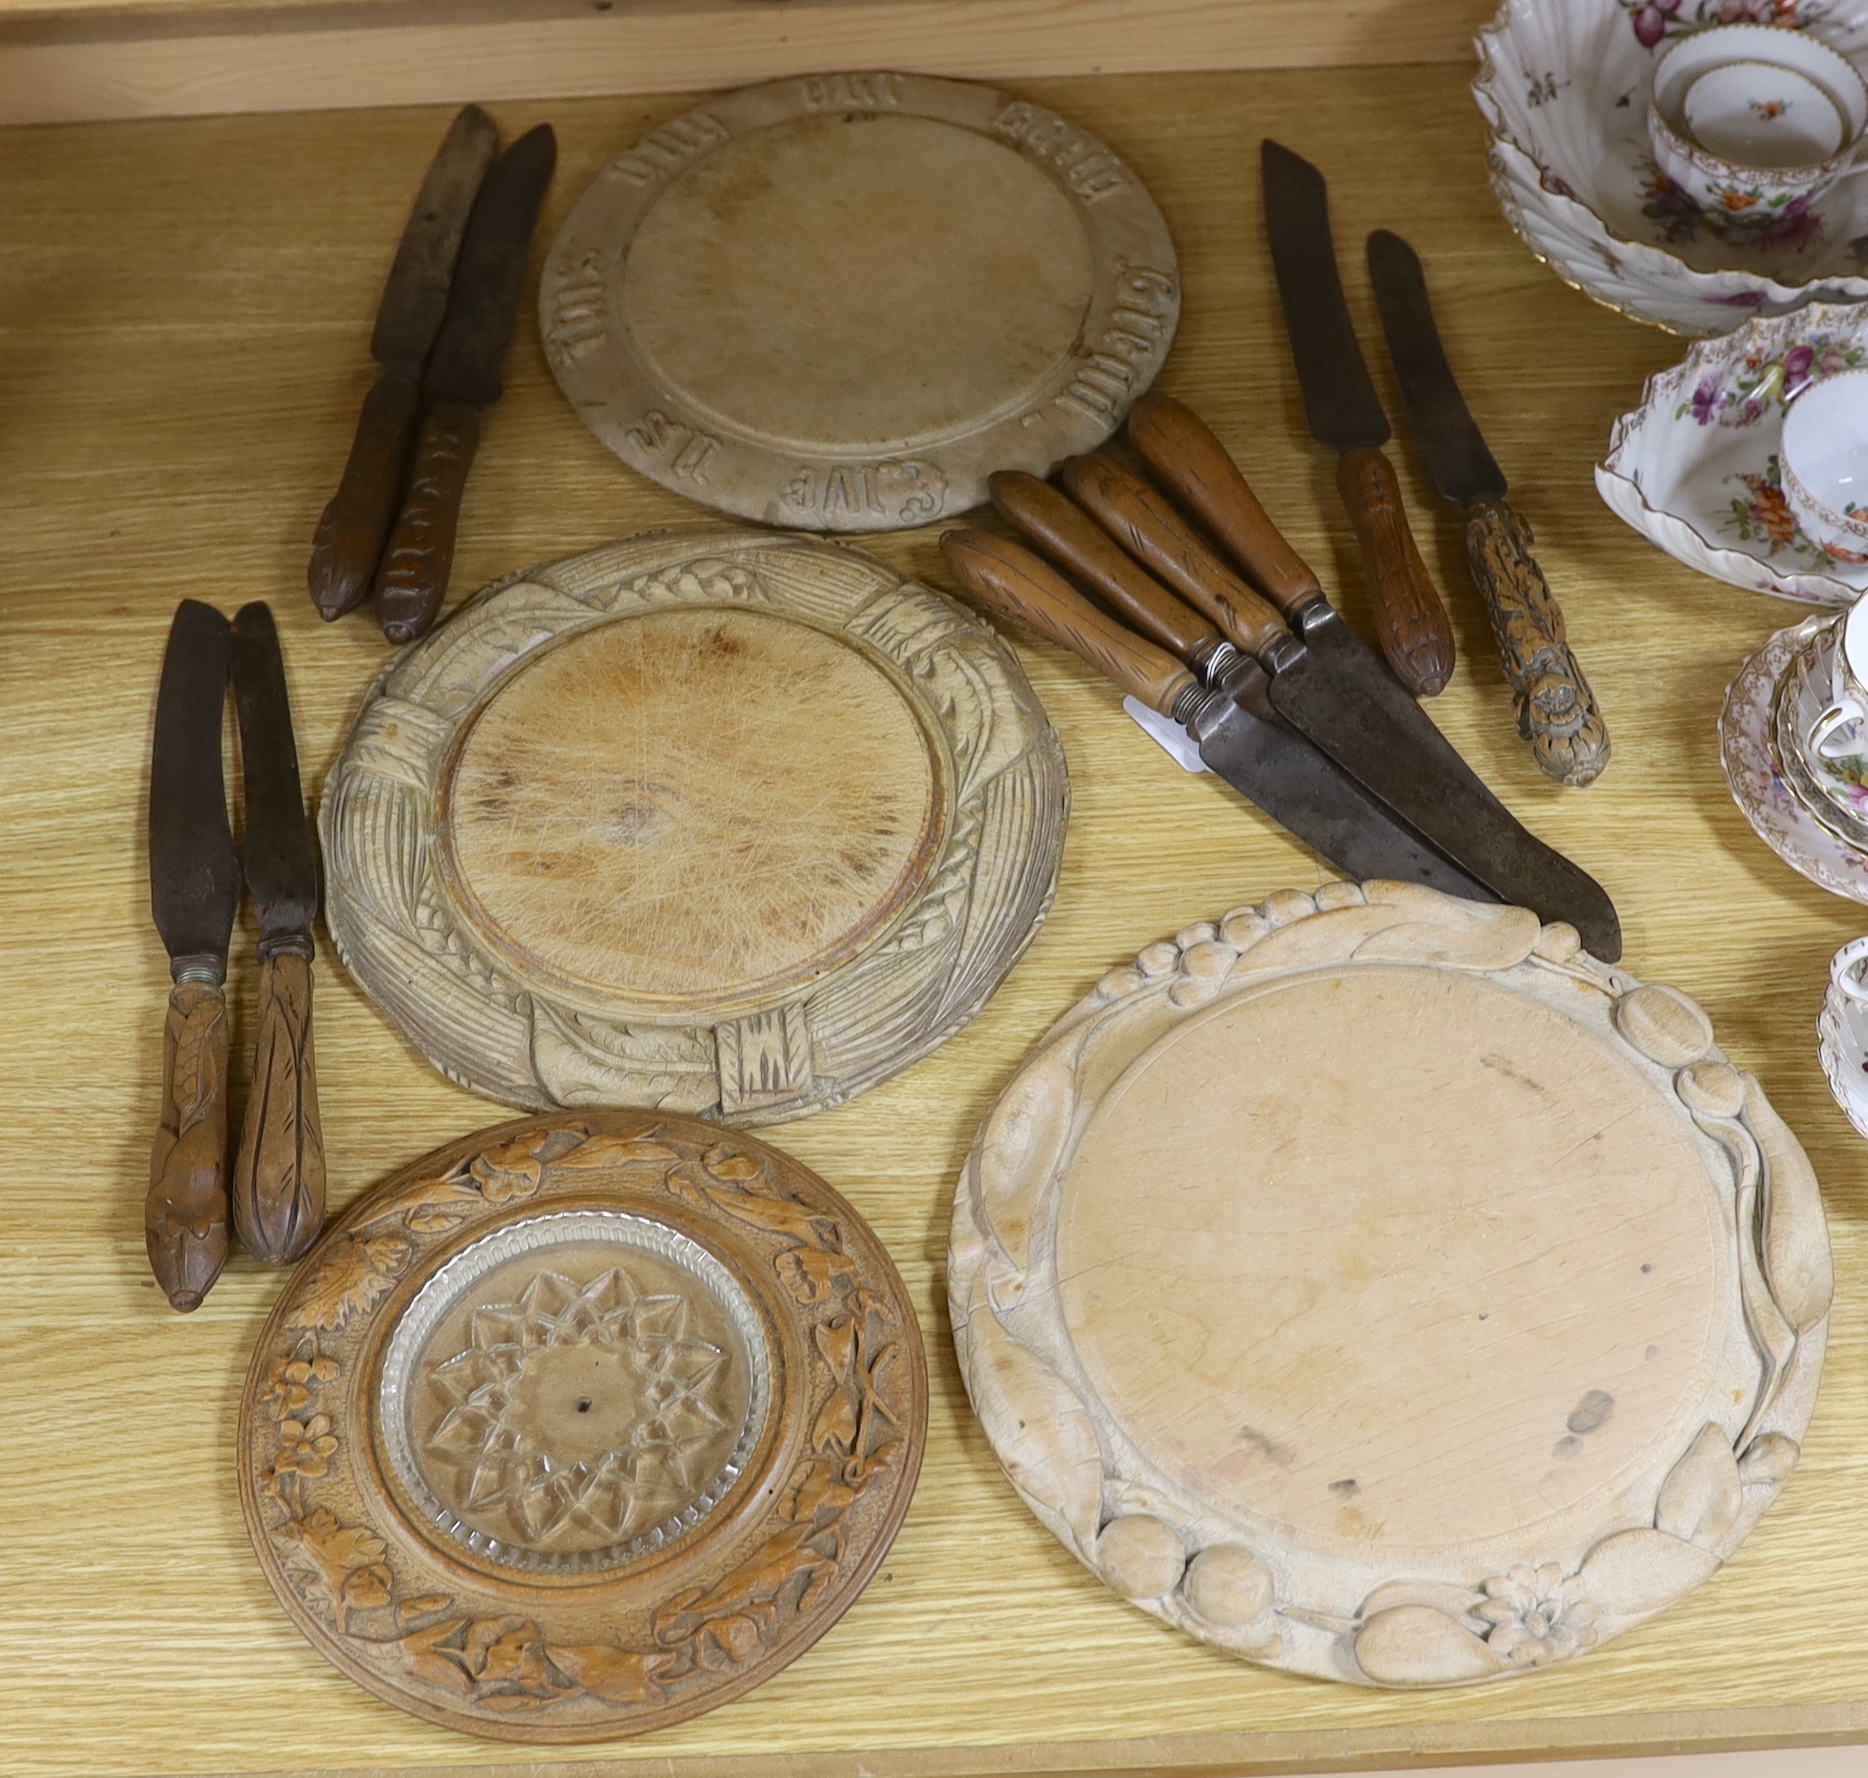 Three carved wood breadboards, a butter dish and a collection of knives with carved handles, largest 29cm in diameter